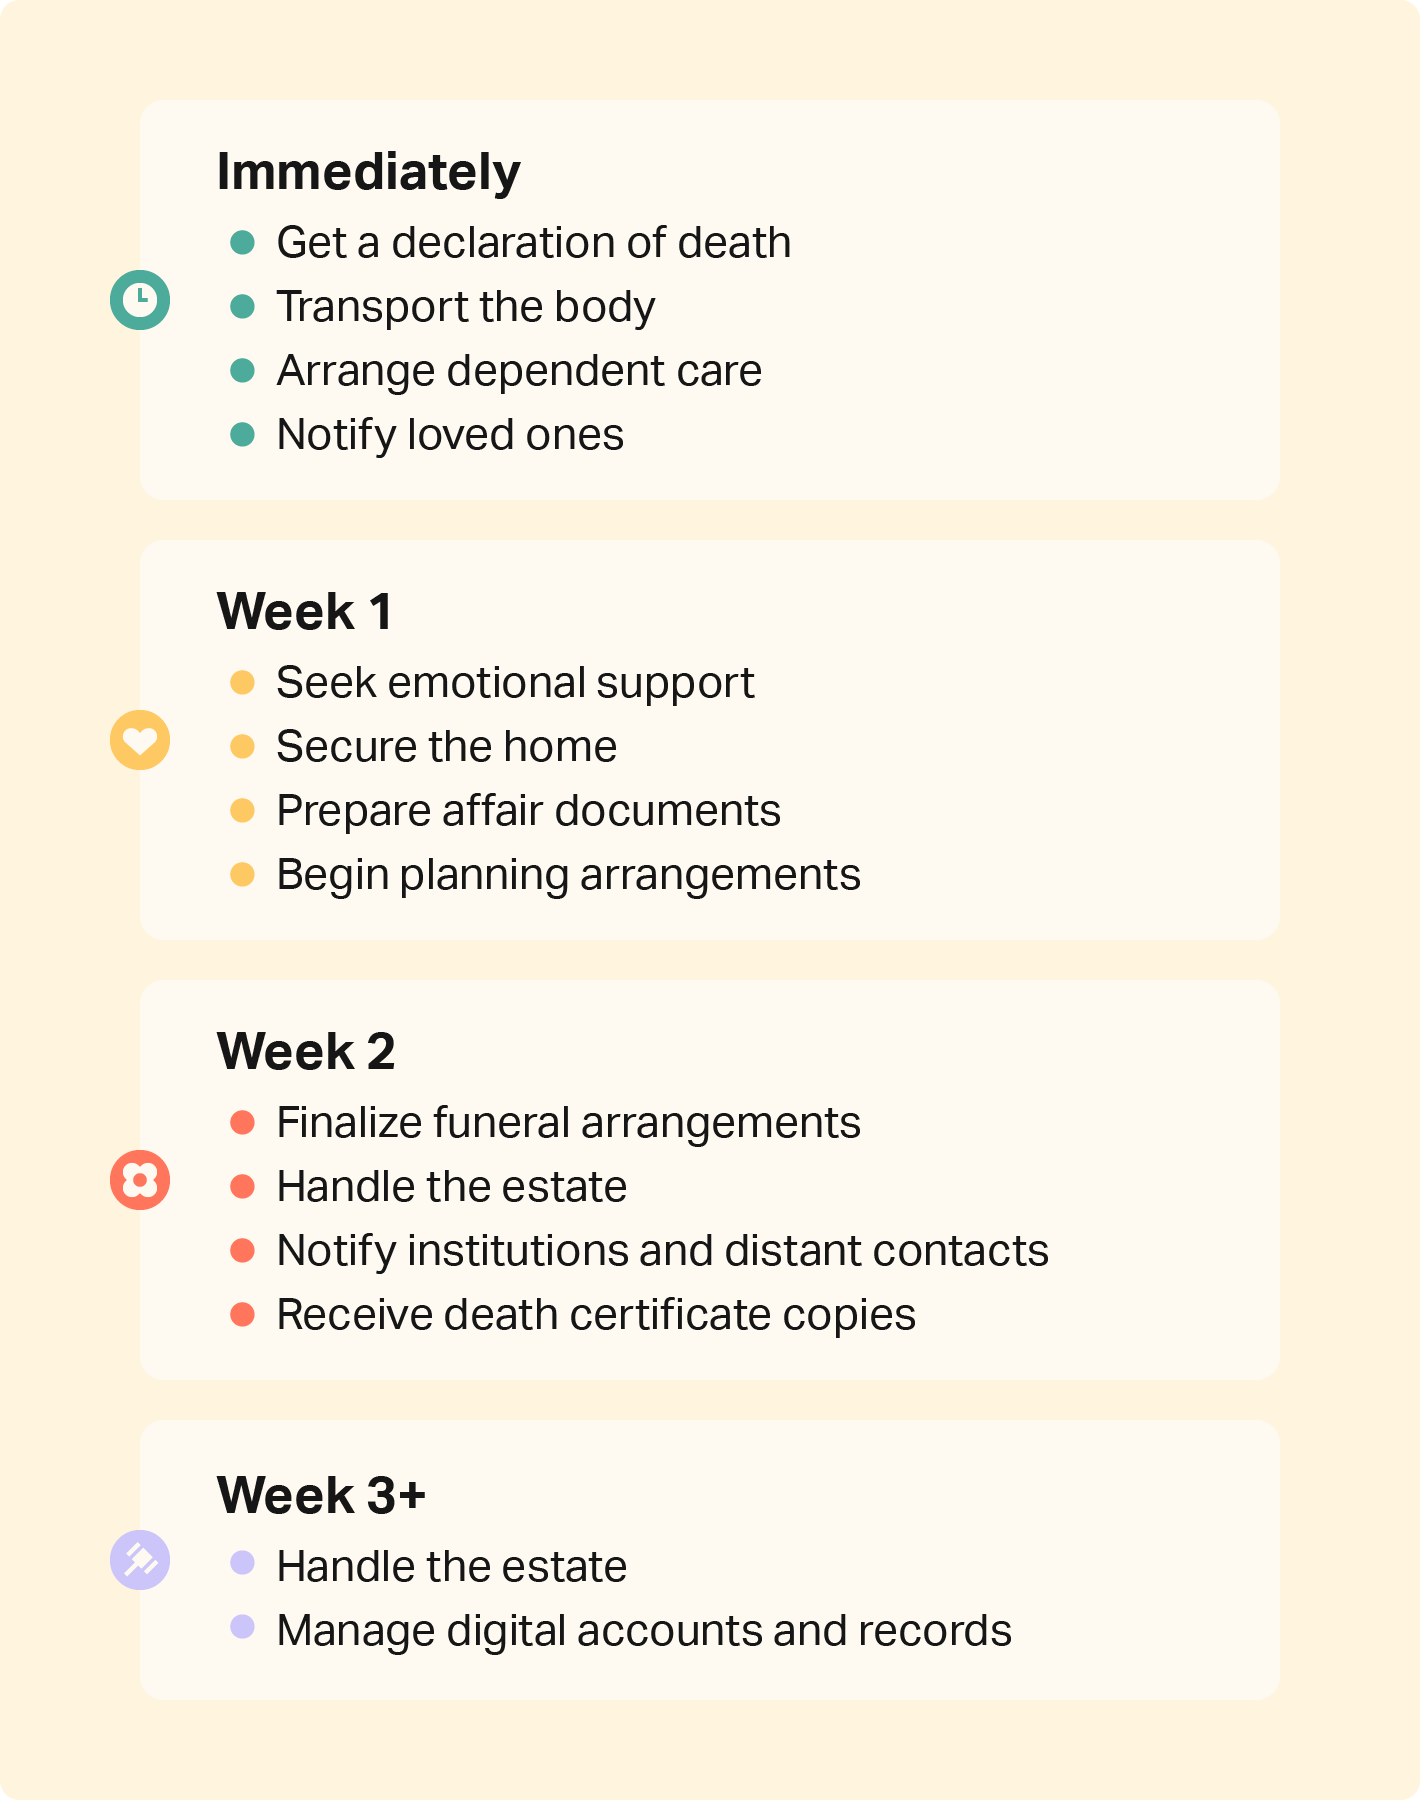 A timeline of steps to take in the weeks following someone's death.